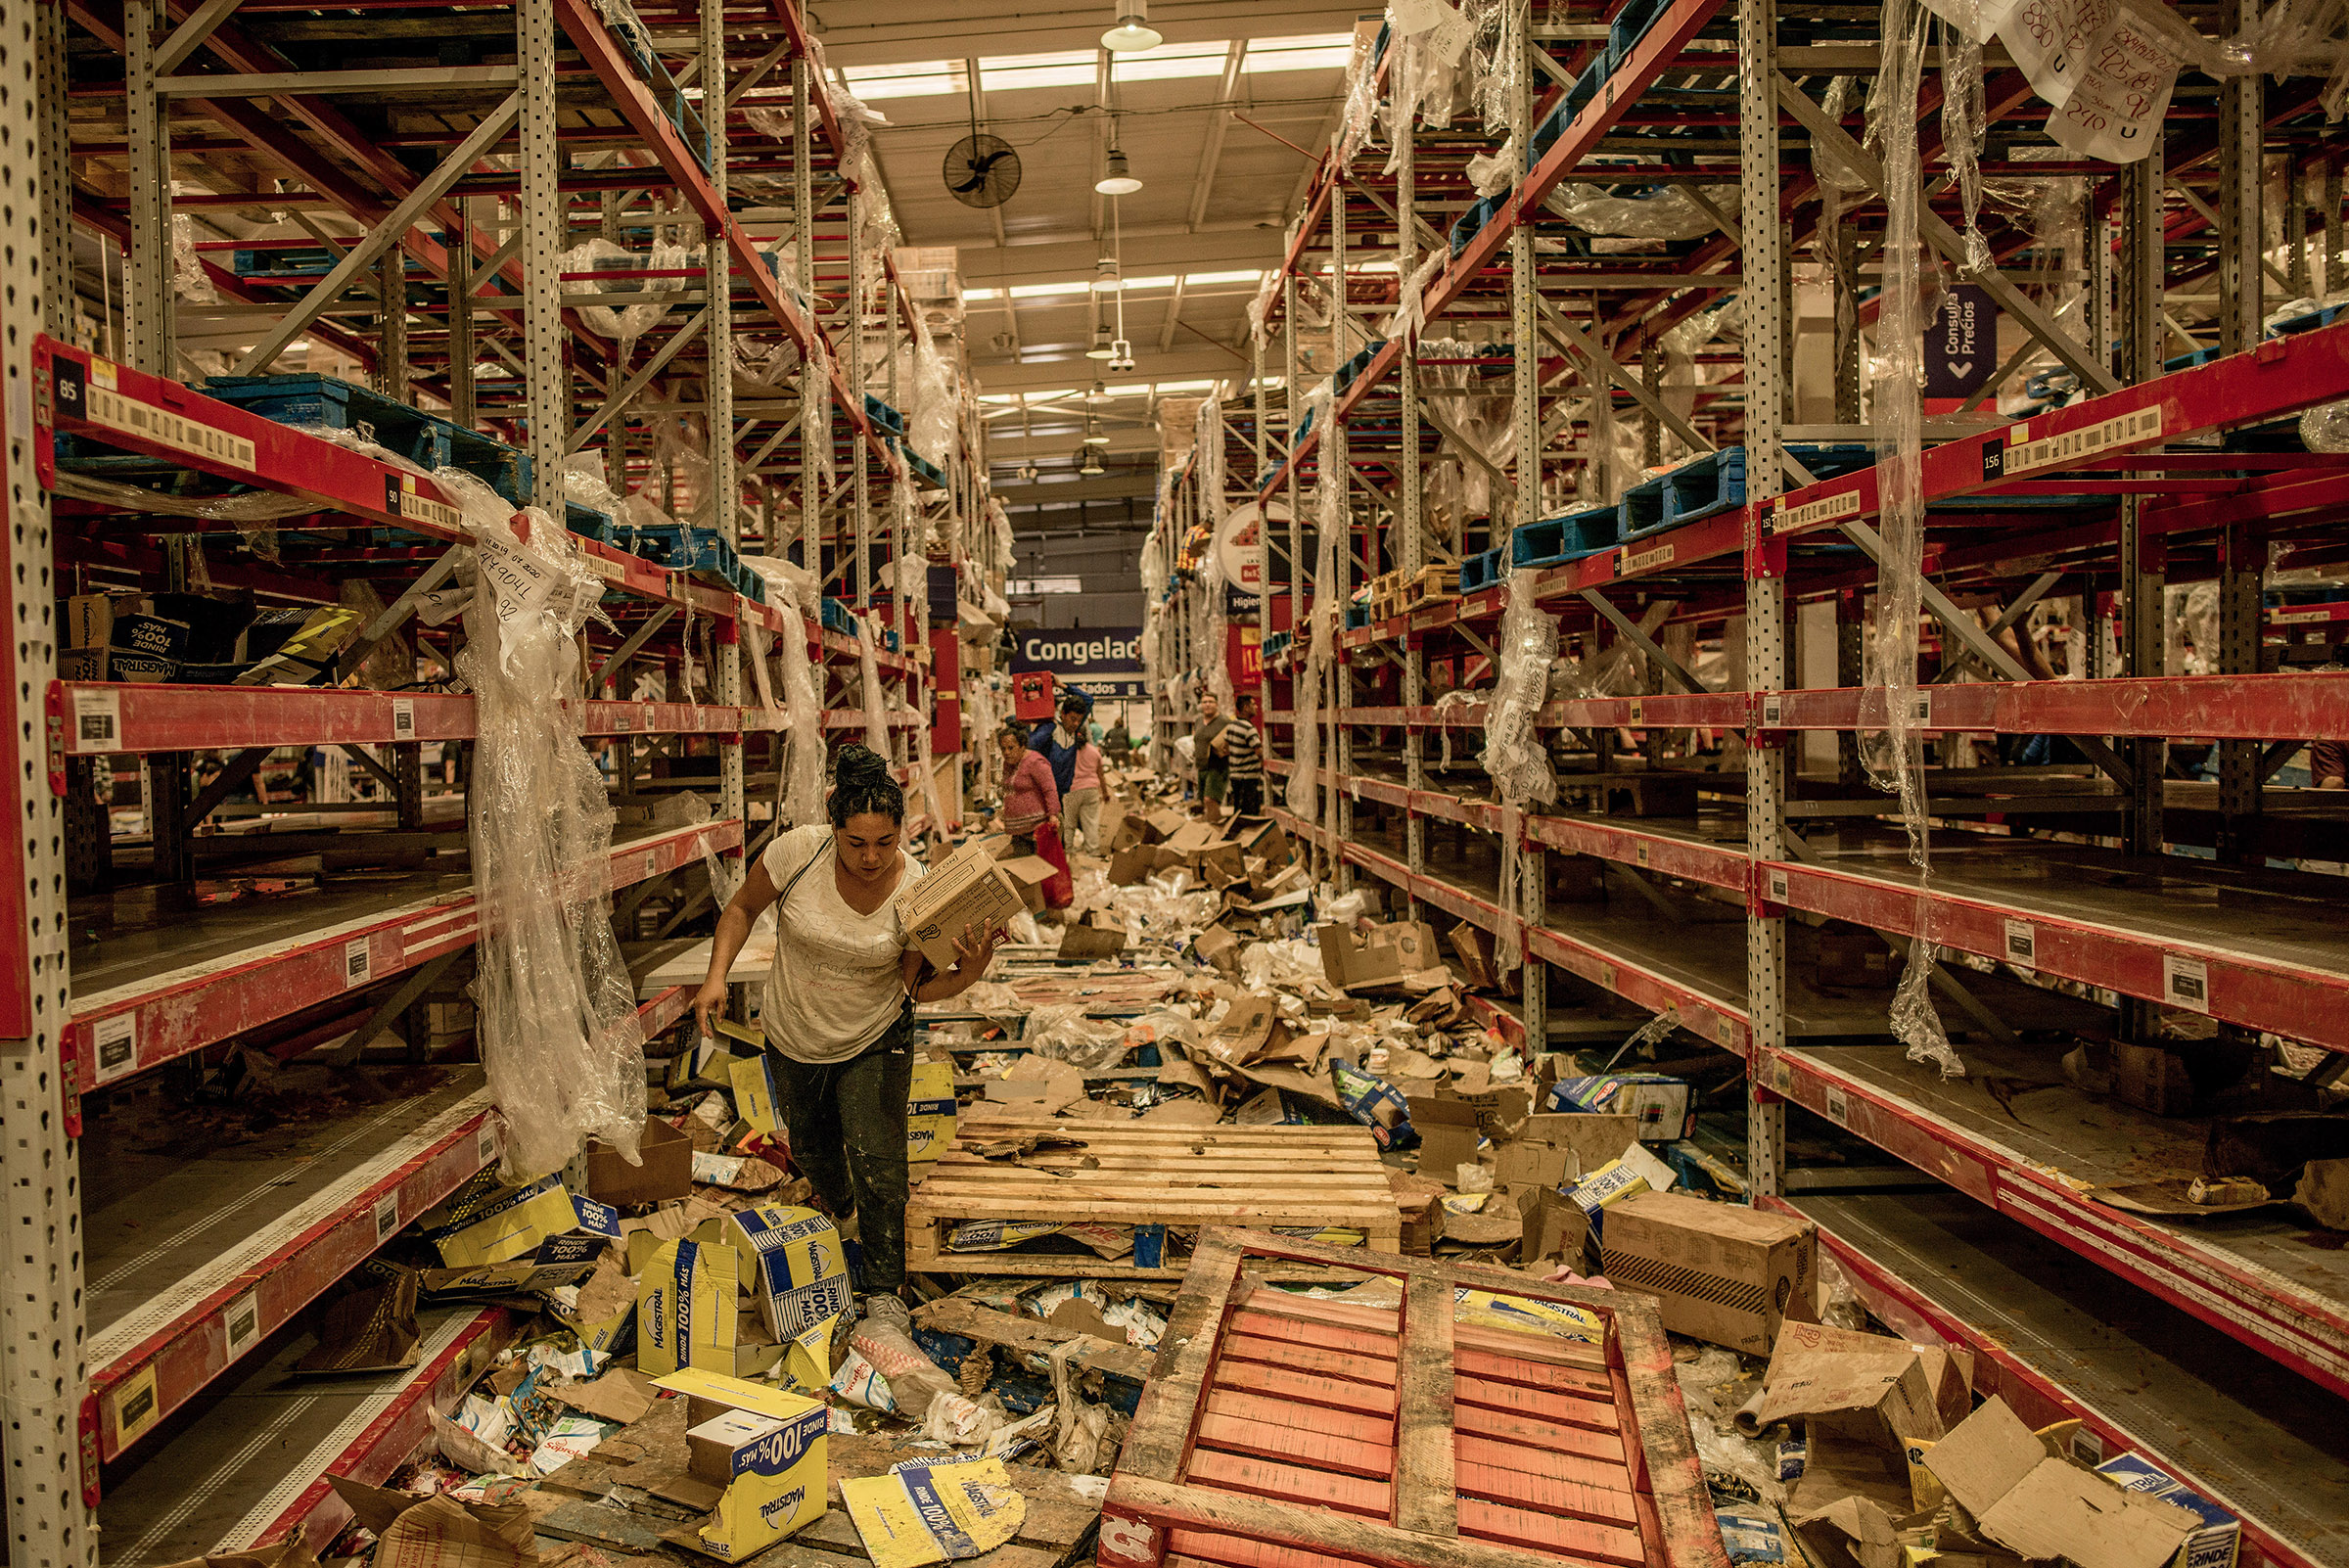 People look through the remains of a looted supermarket in Santiago, Chile, Oct. 23, 2019. (Tomas Munita/The New York Times)